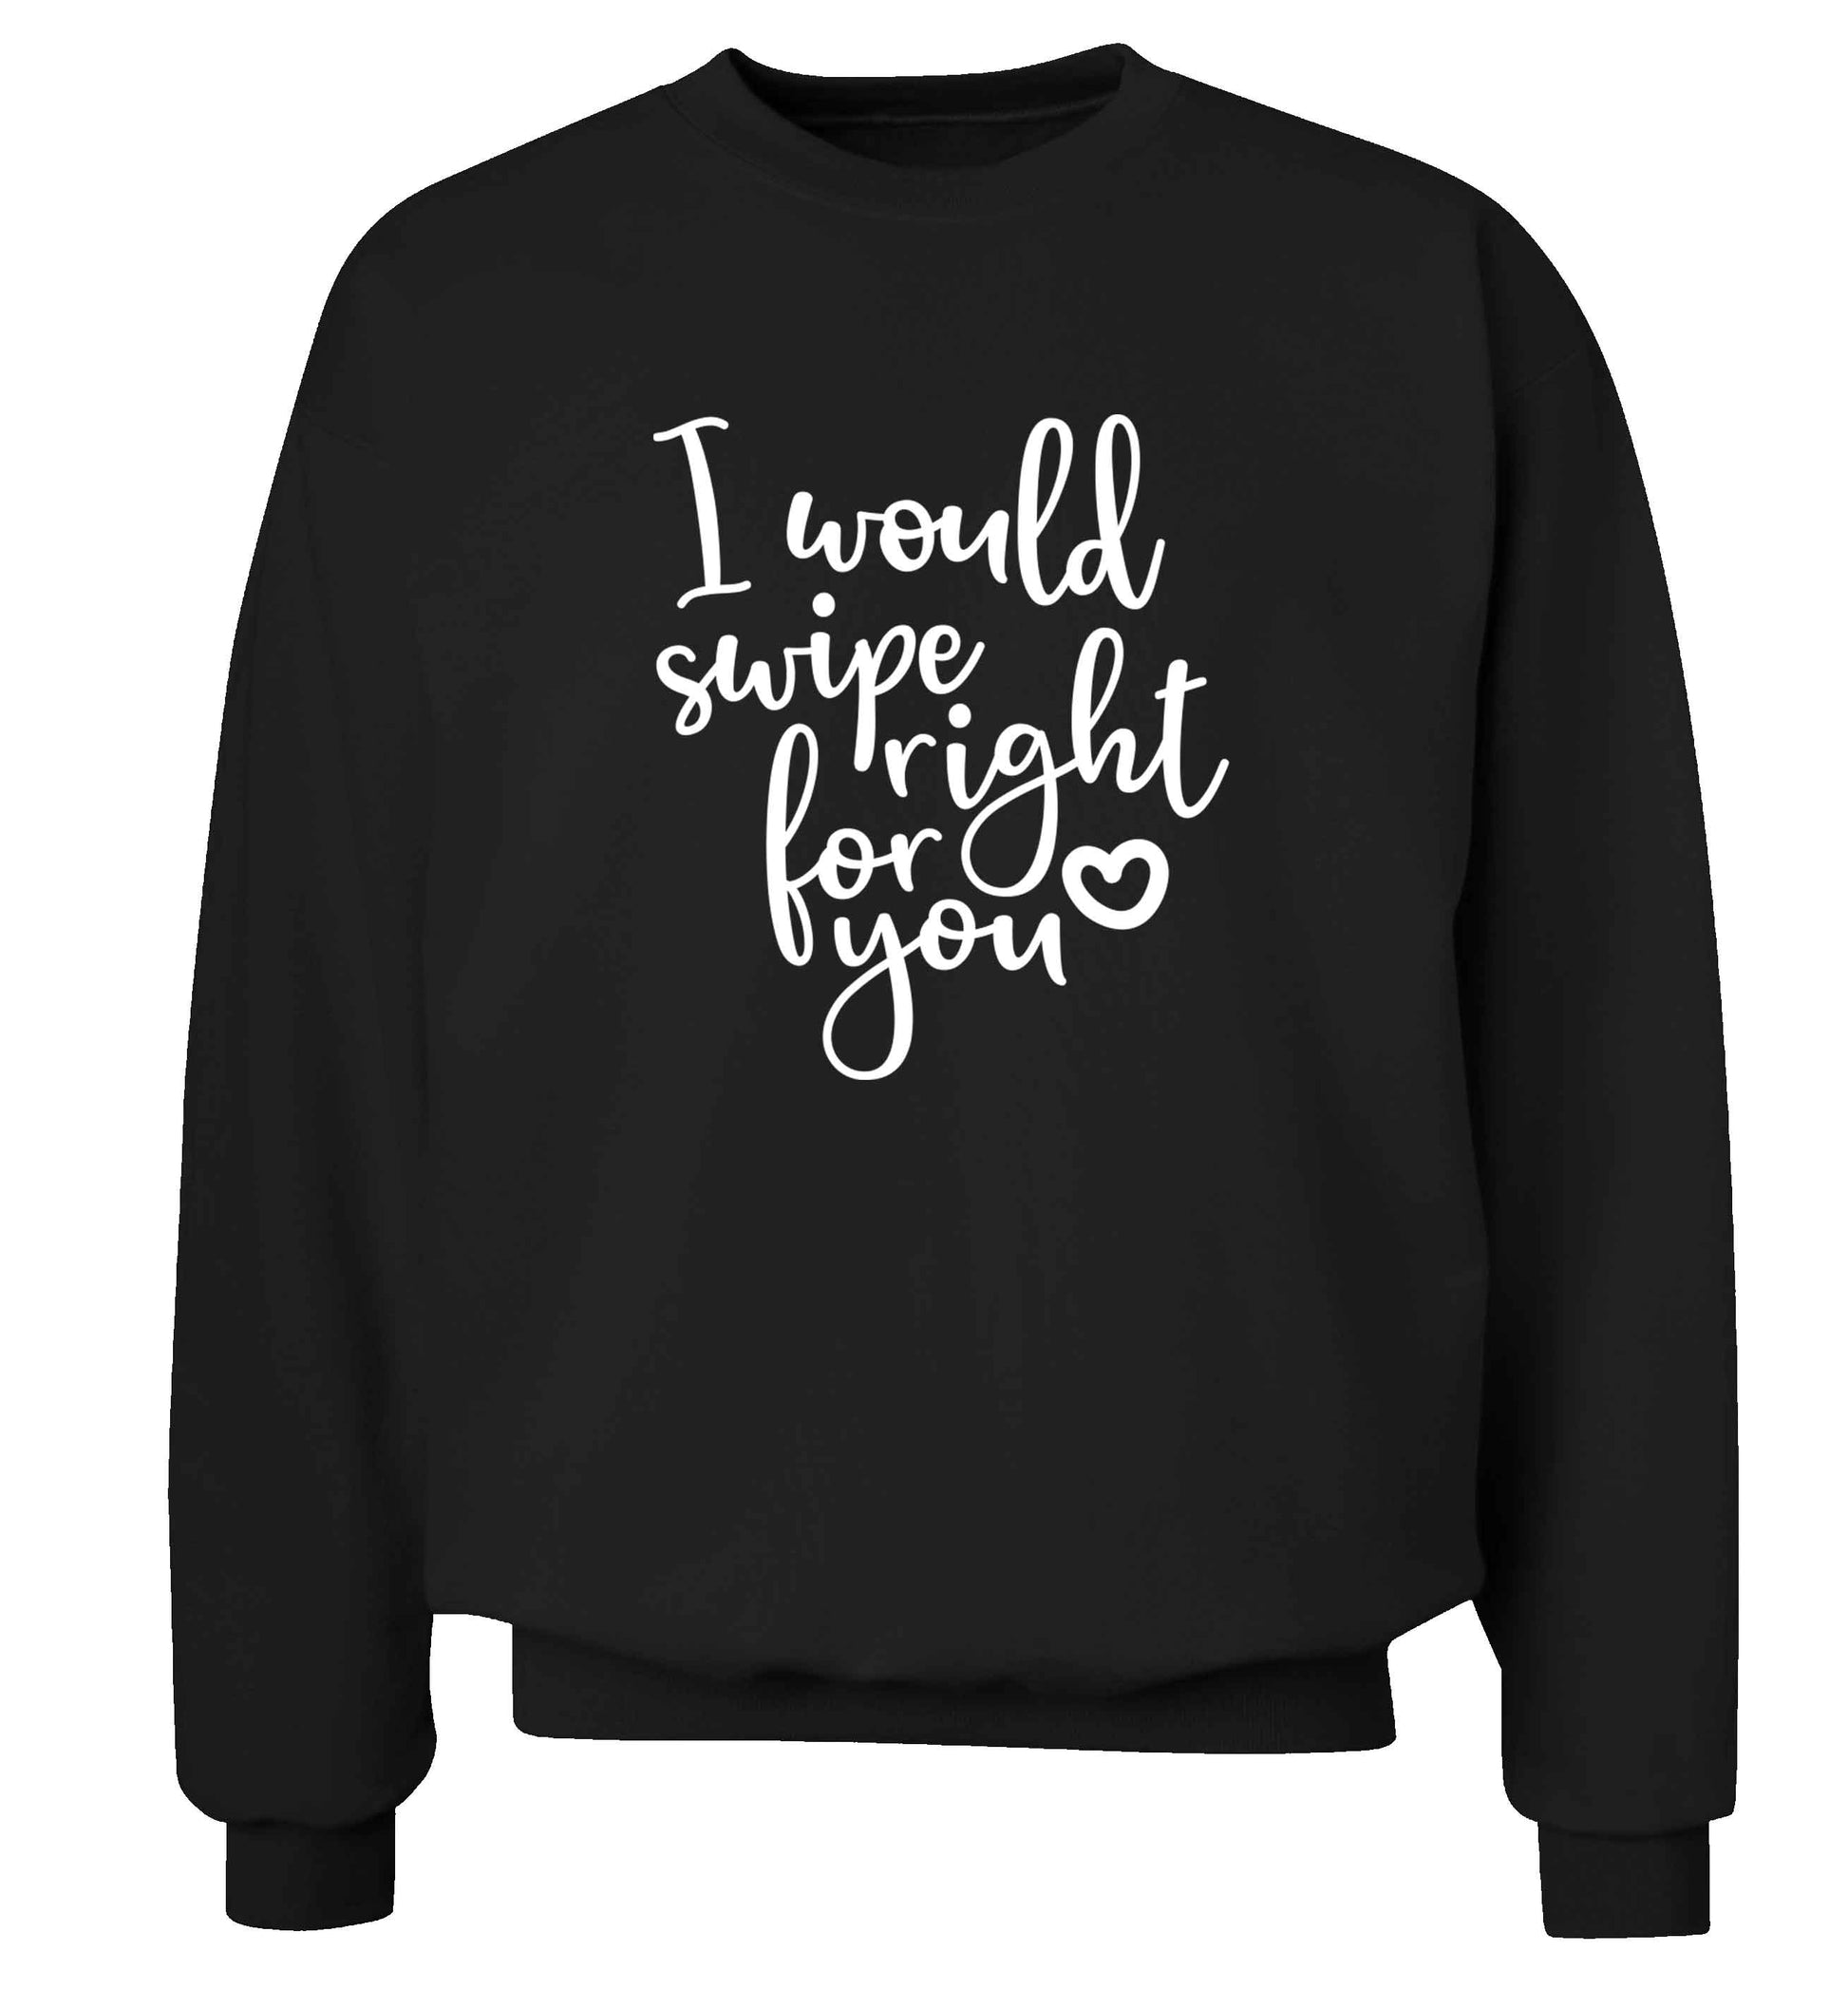 I would swipe right for you adult's unisex black sweater 2XL